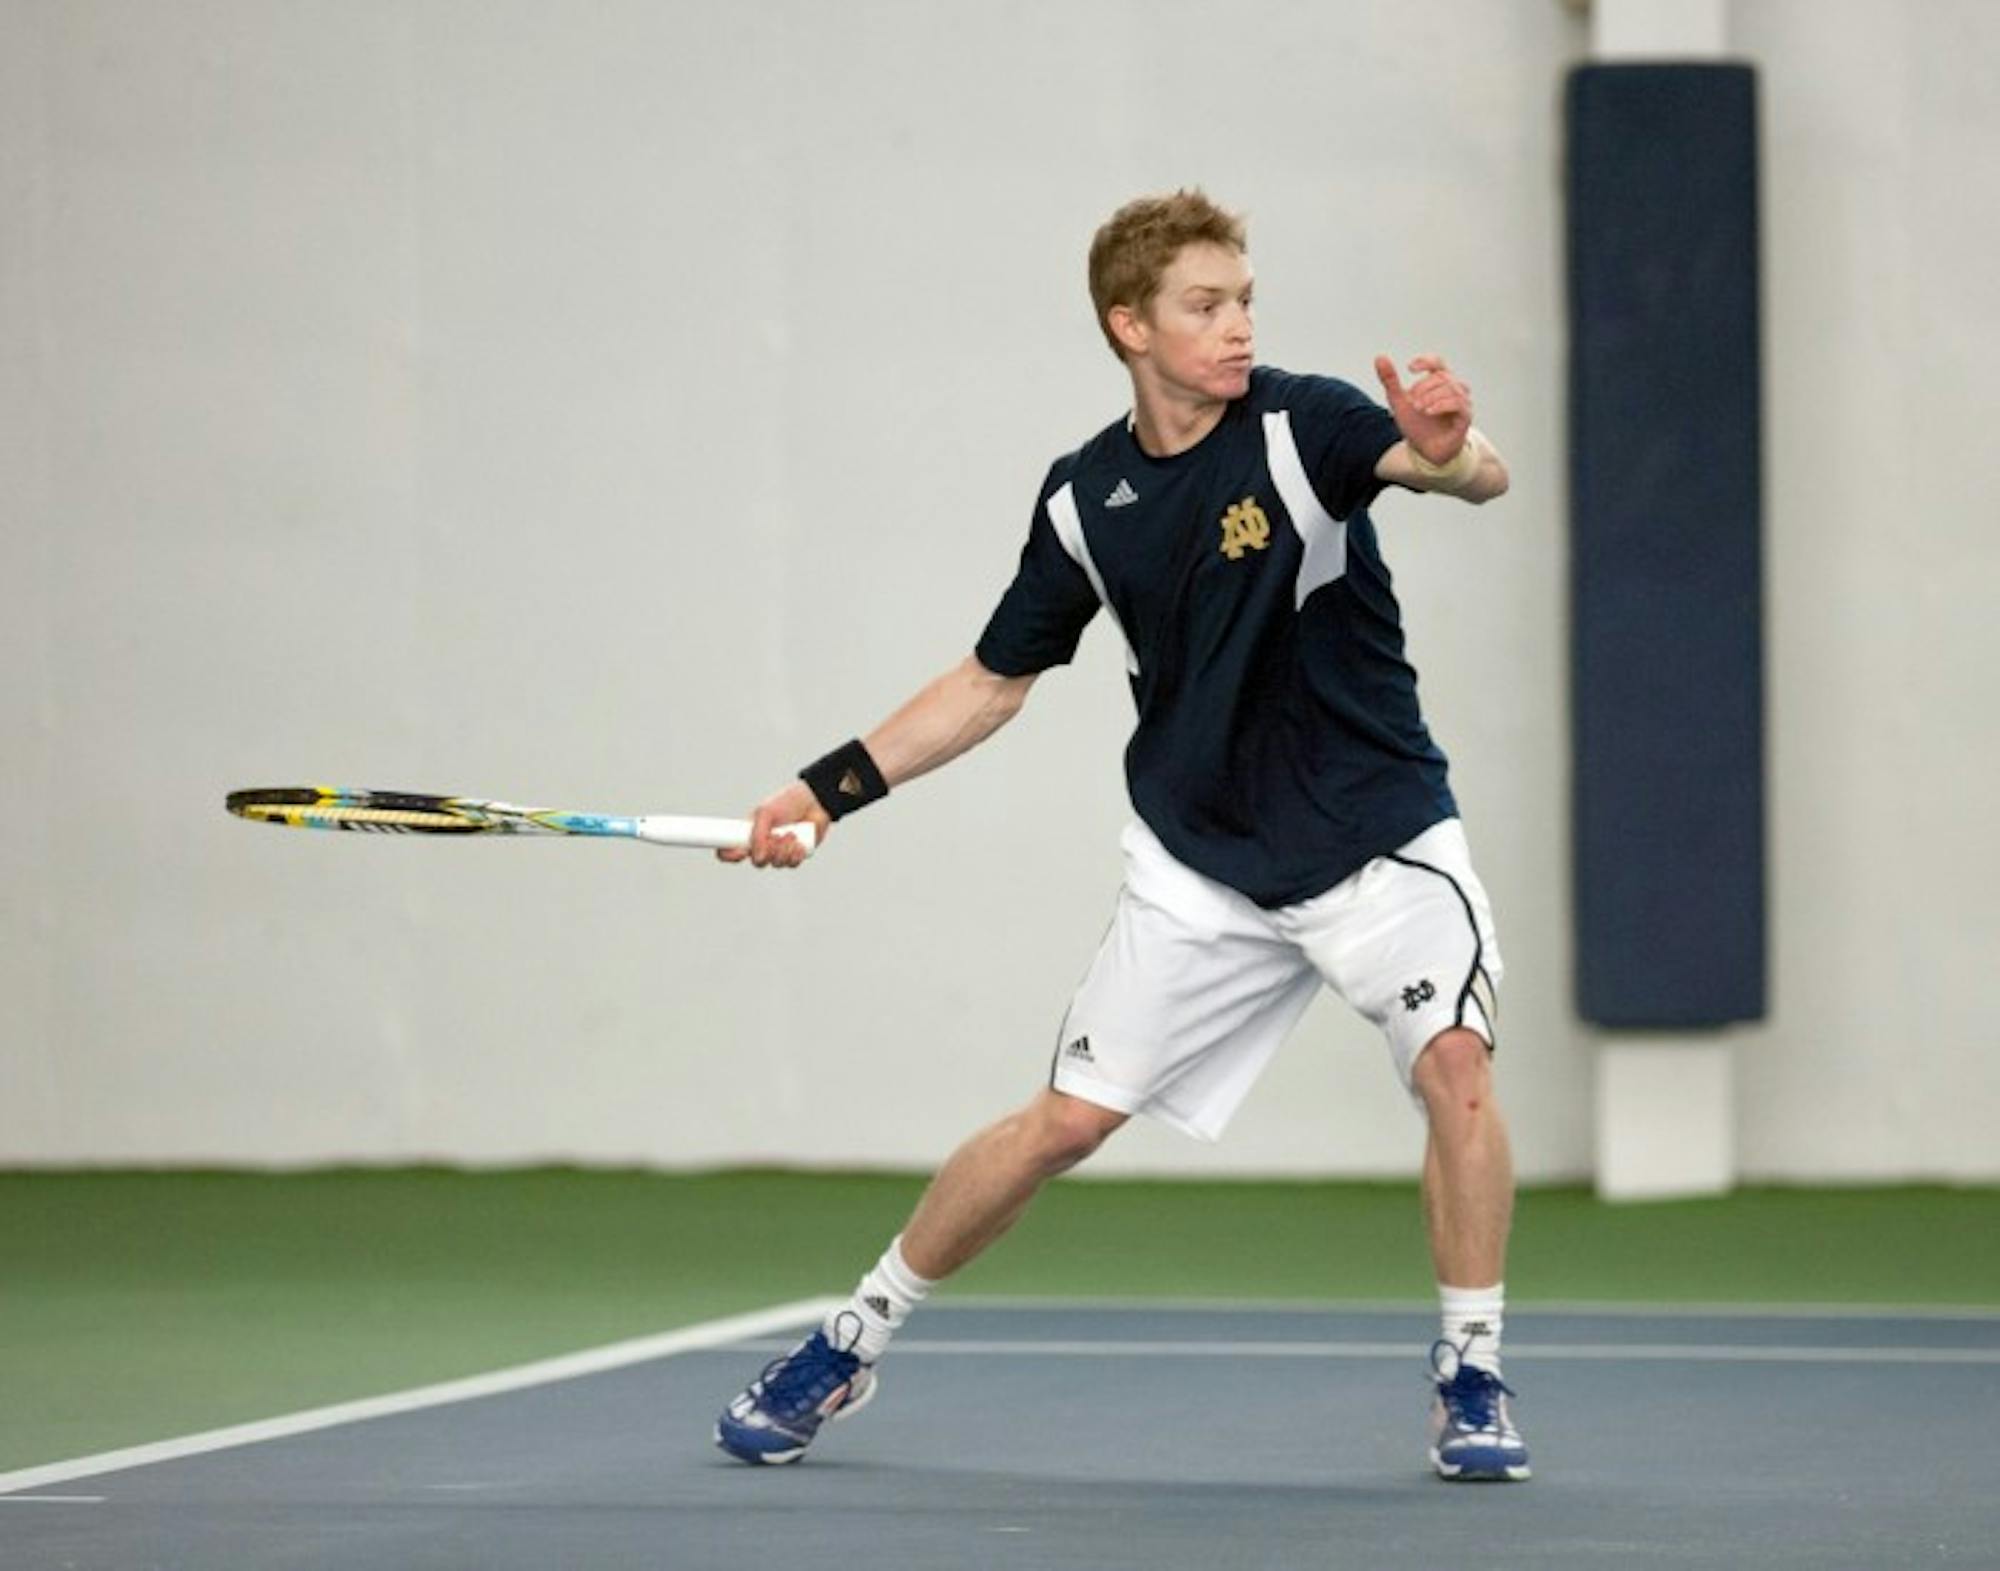 Irish sophomore Josh Hagar sets up to return a volley during Notre Dame’s 4-3 win over Kentucky on Feb. 2 at Eck Tennis Center.